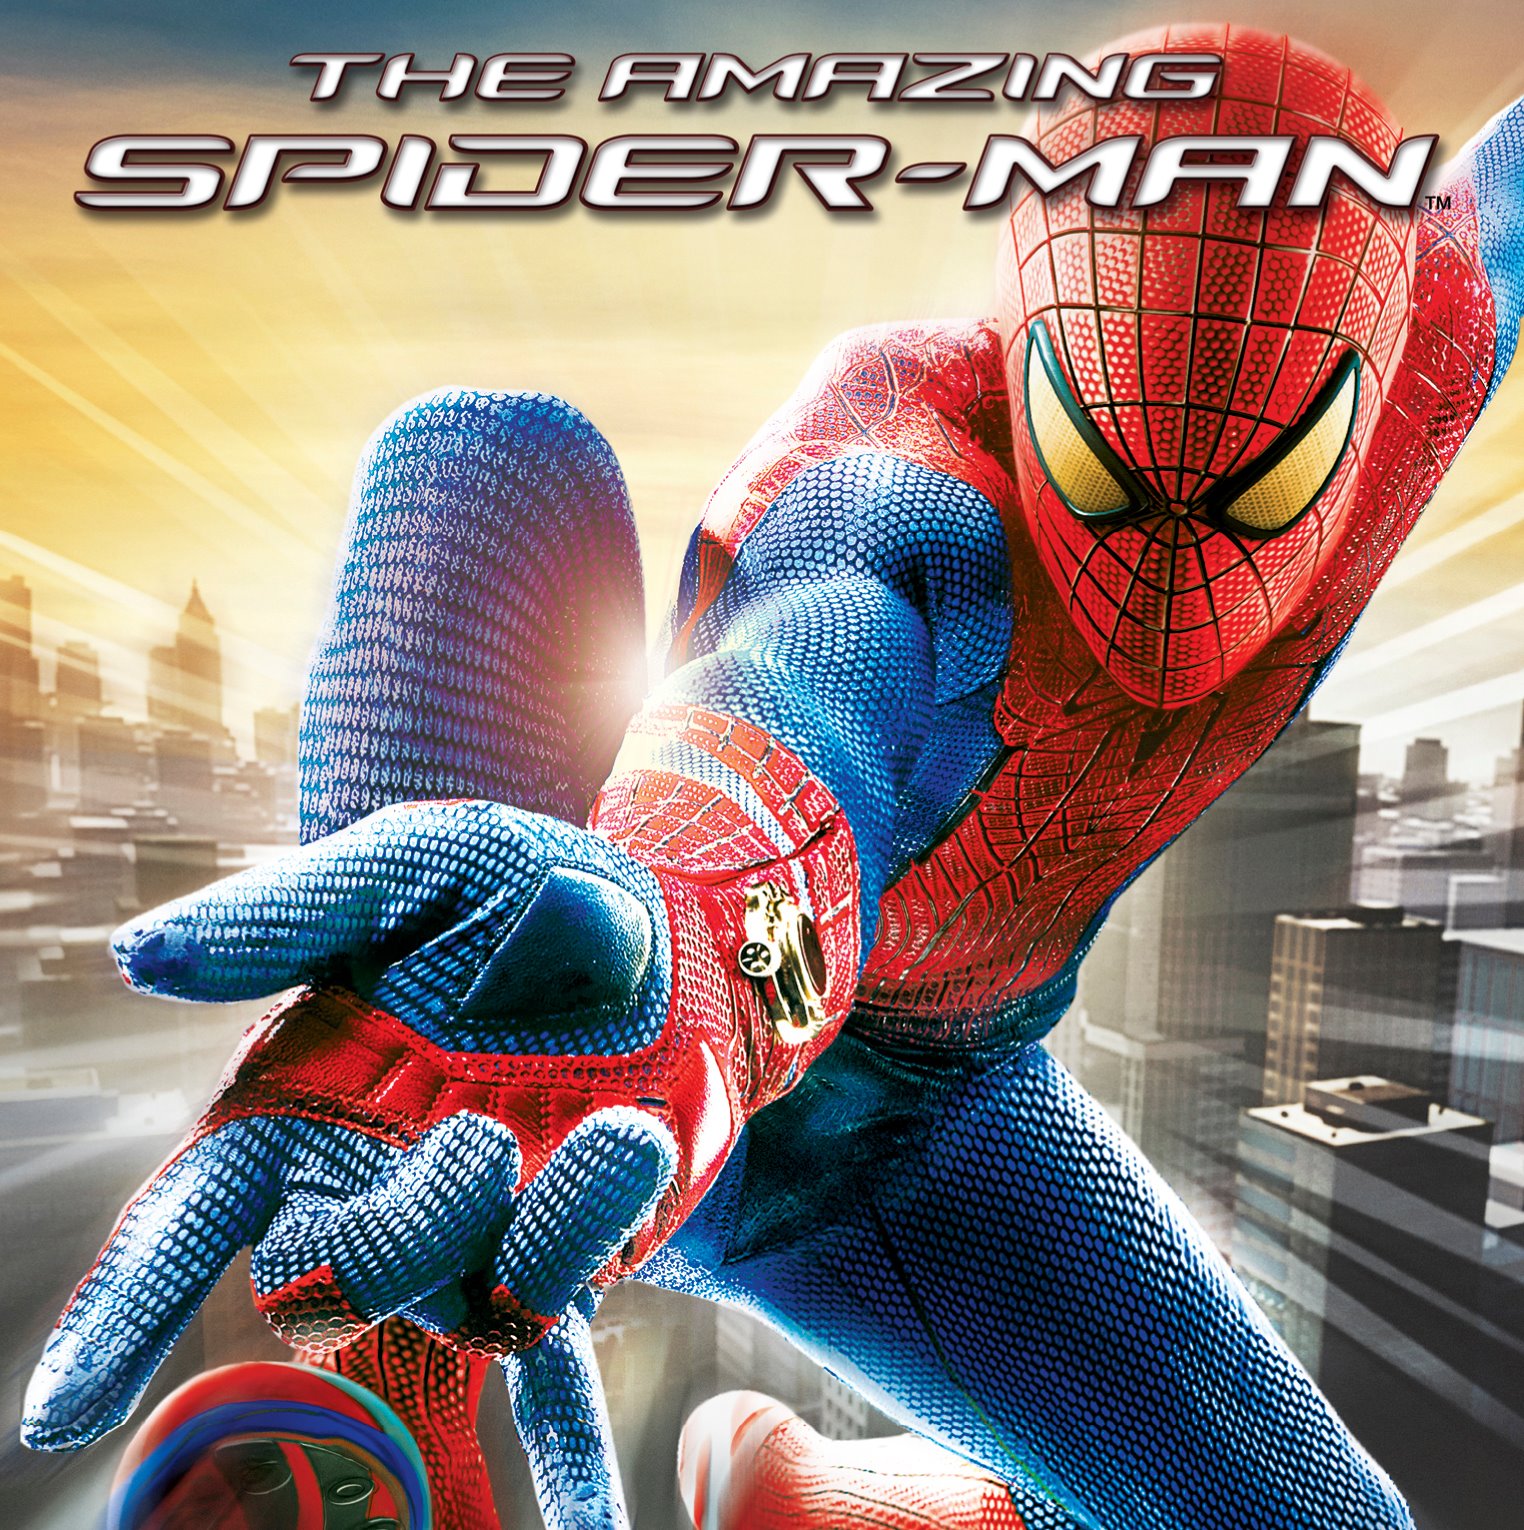 Variety of Spiderman Games Available